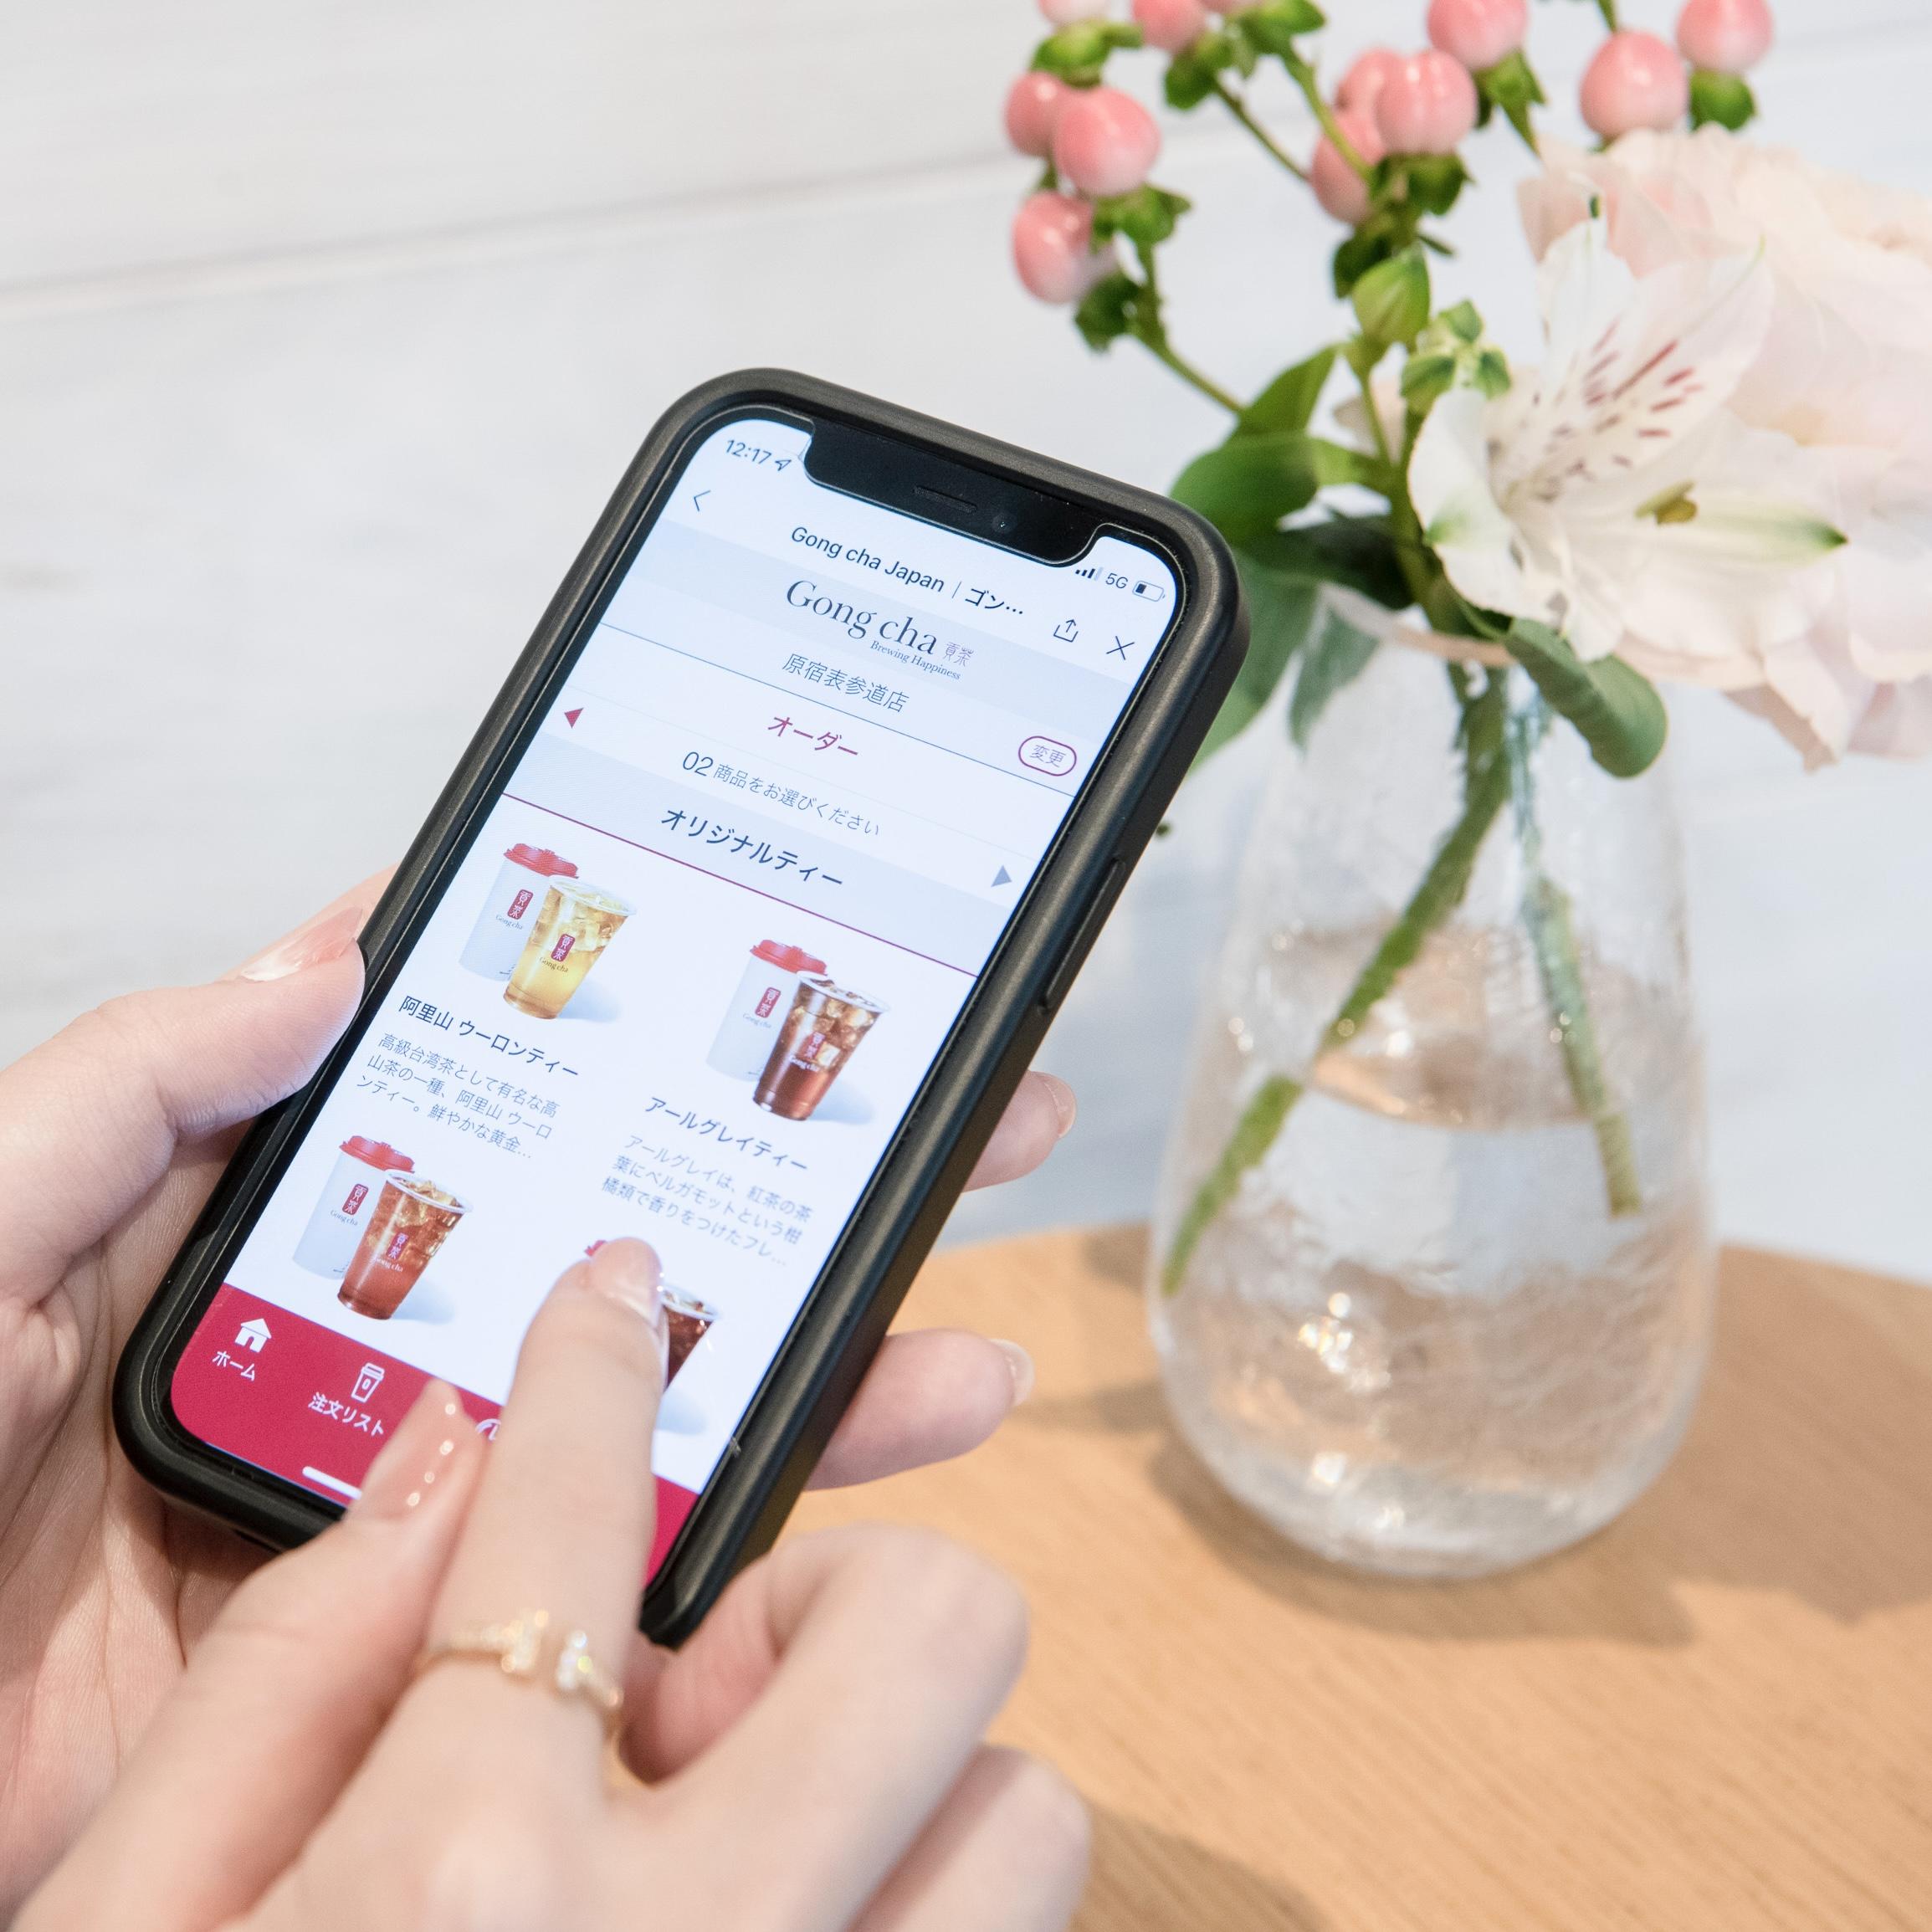 What were the effects of introducing mobile ordering?